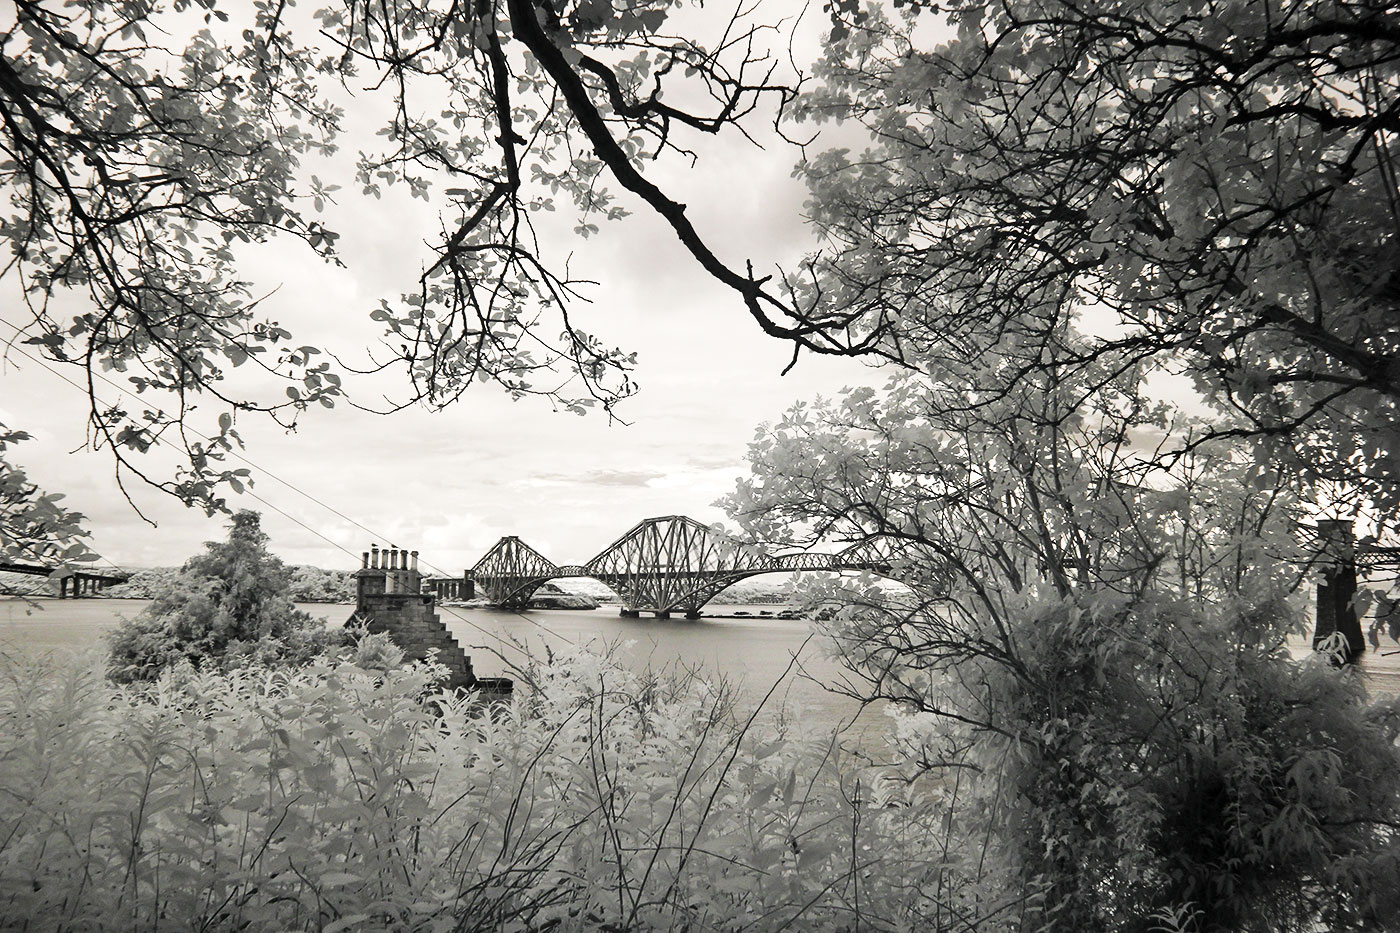 Infra-red Photo  -  The Forth Bridge  -  June 2014